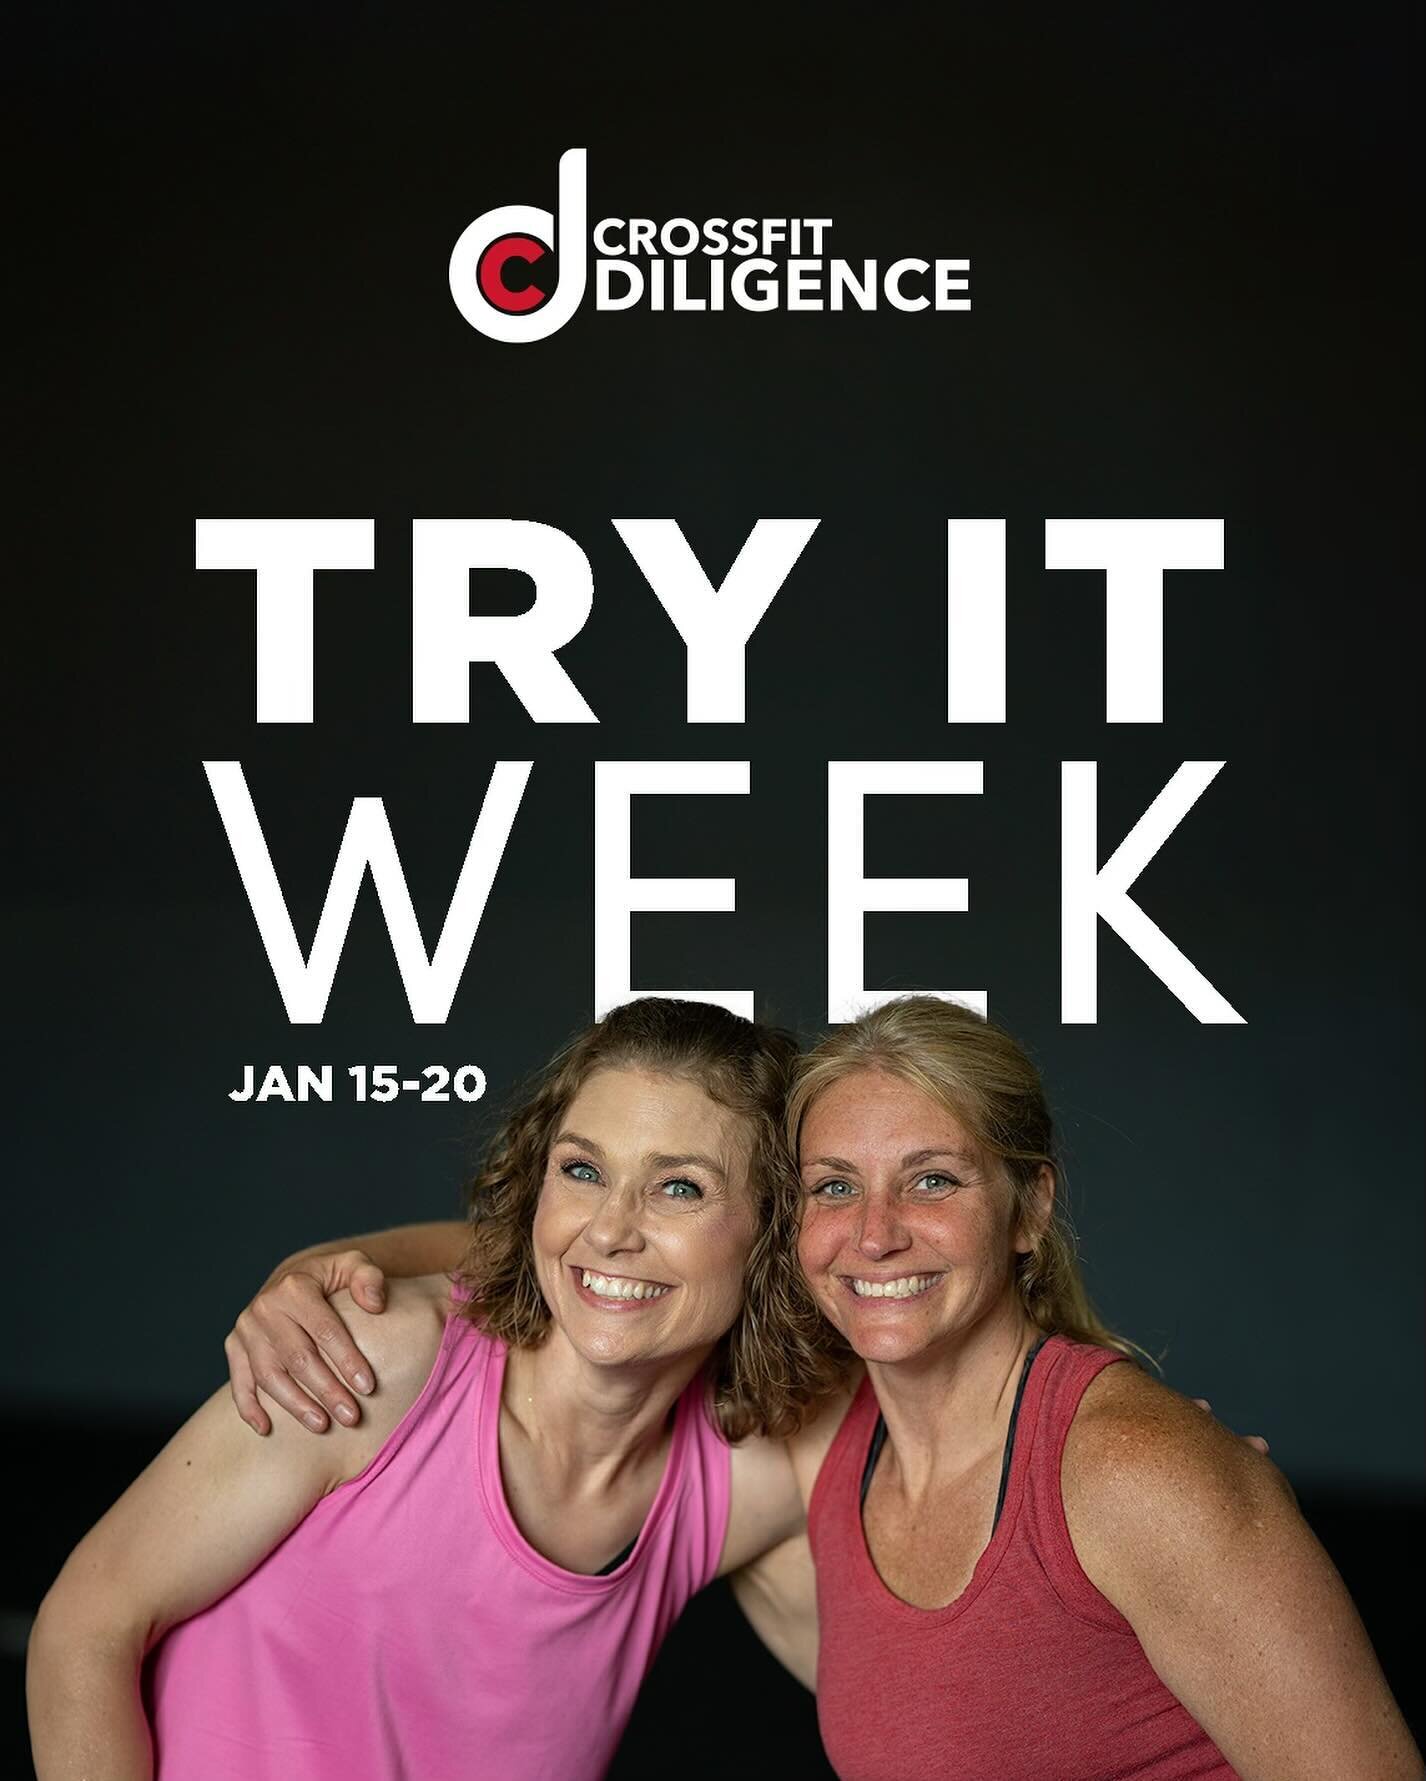 Try any class for FREE between January 15th-20th. Come to one class, come all week, doesn&rsquo;t matter. All classes will be free. 

Now is your chance to see what we are all about and get a feel for how great our community-based fitness is.